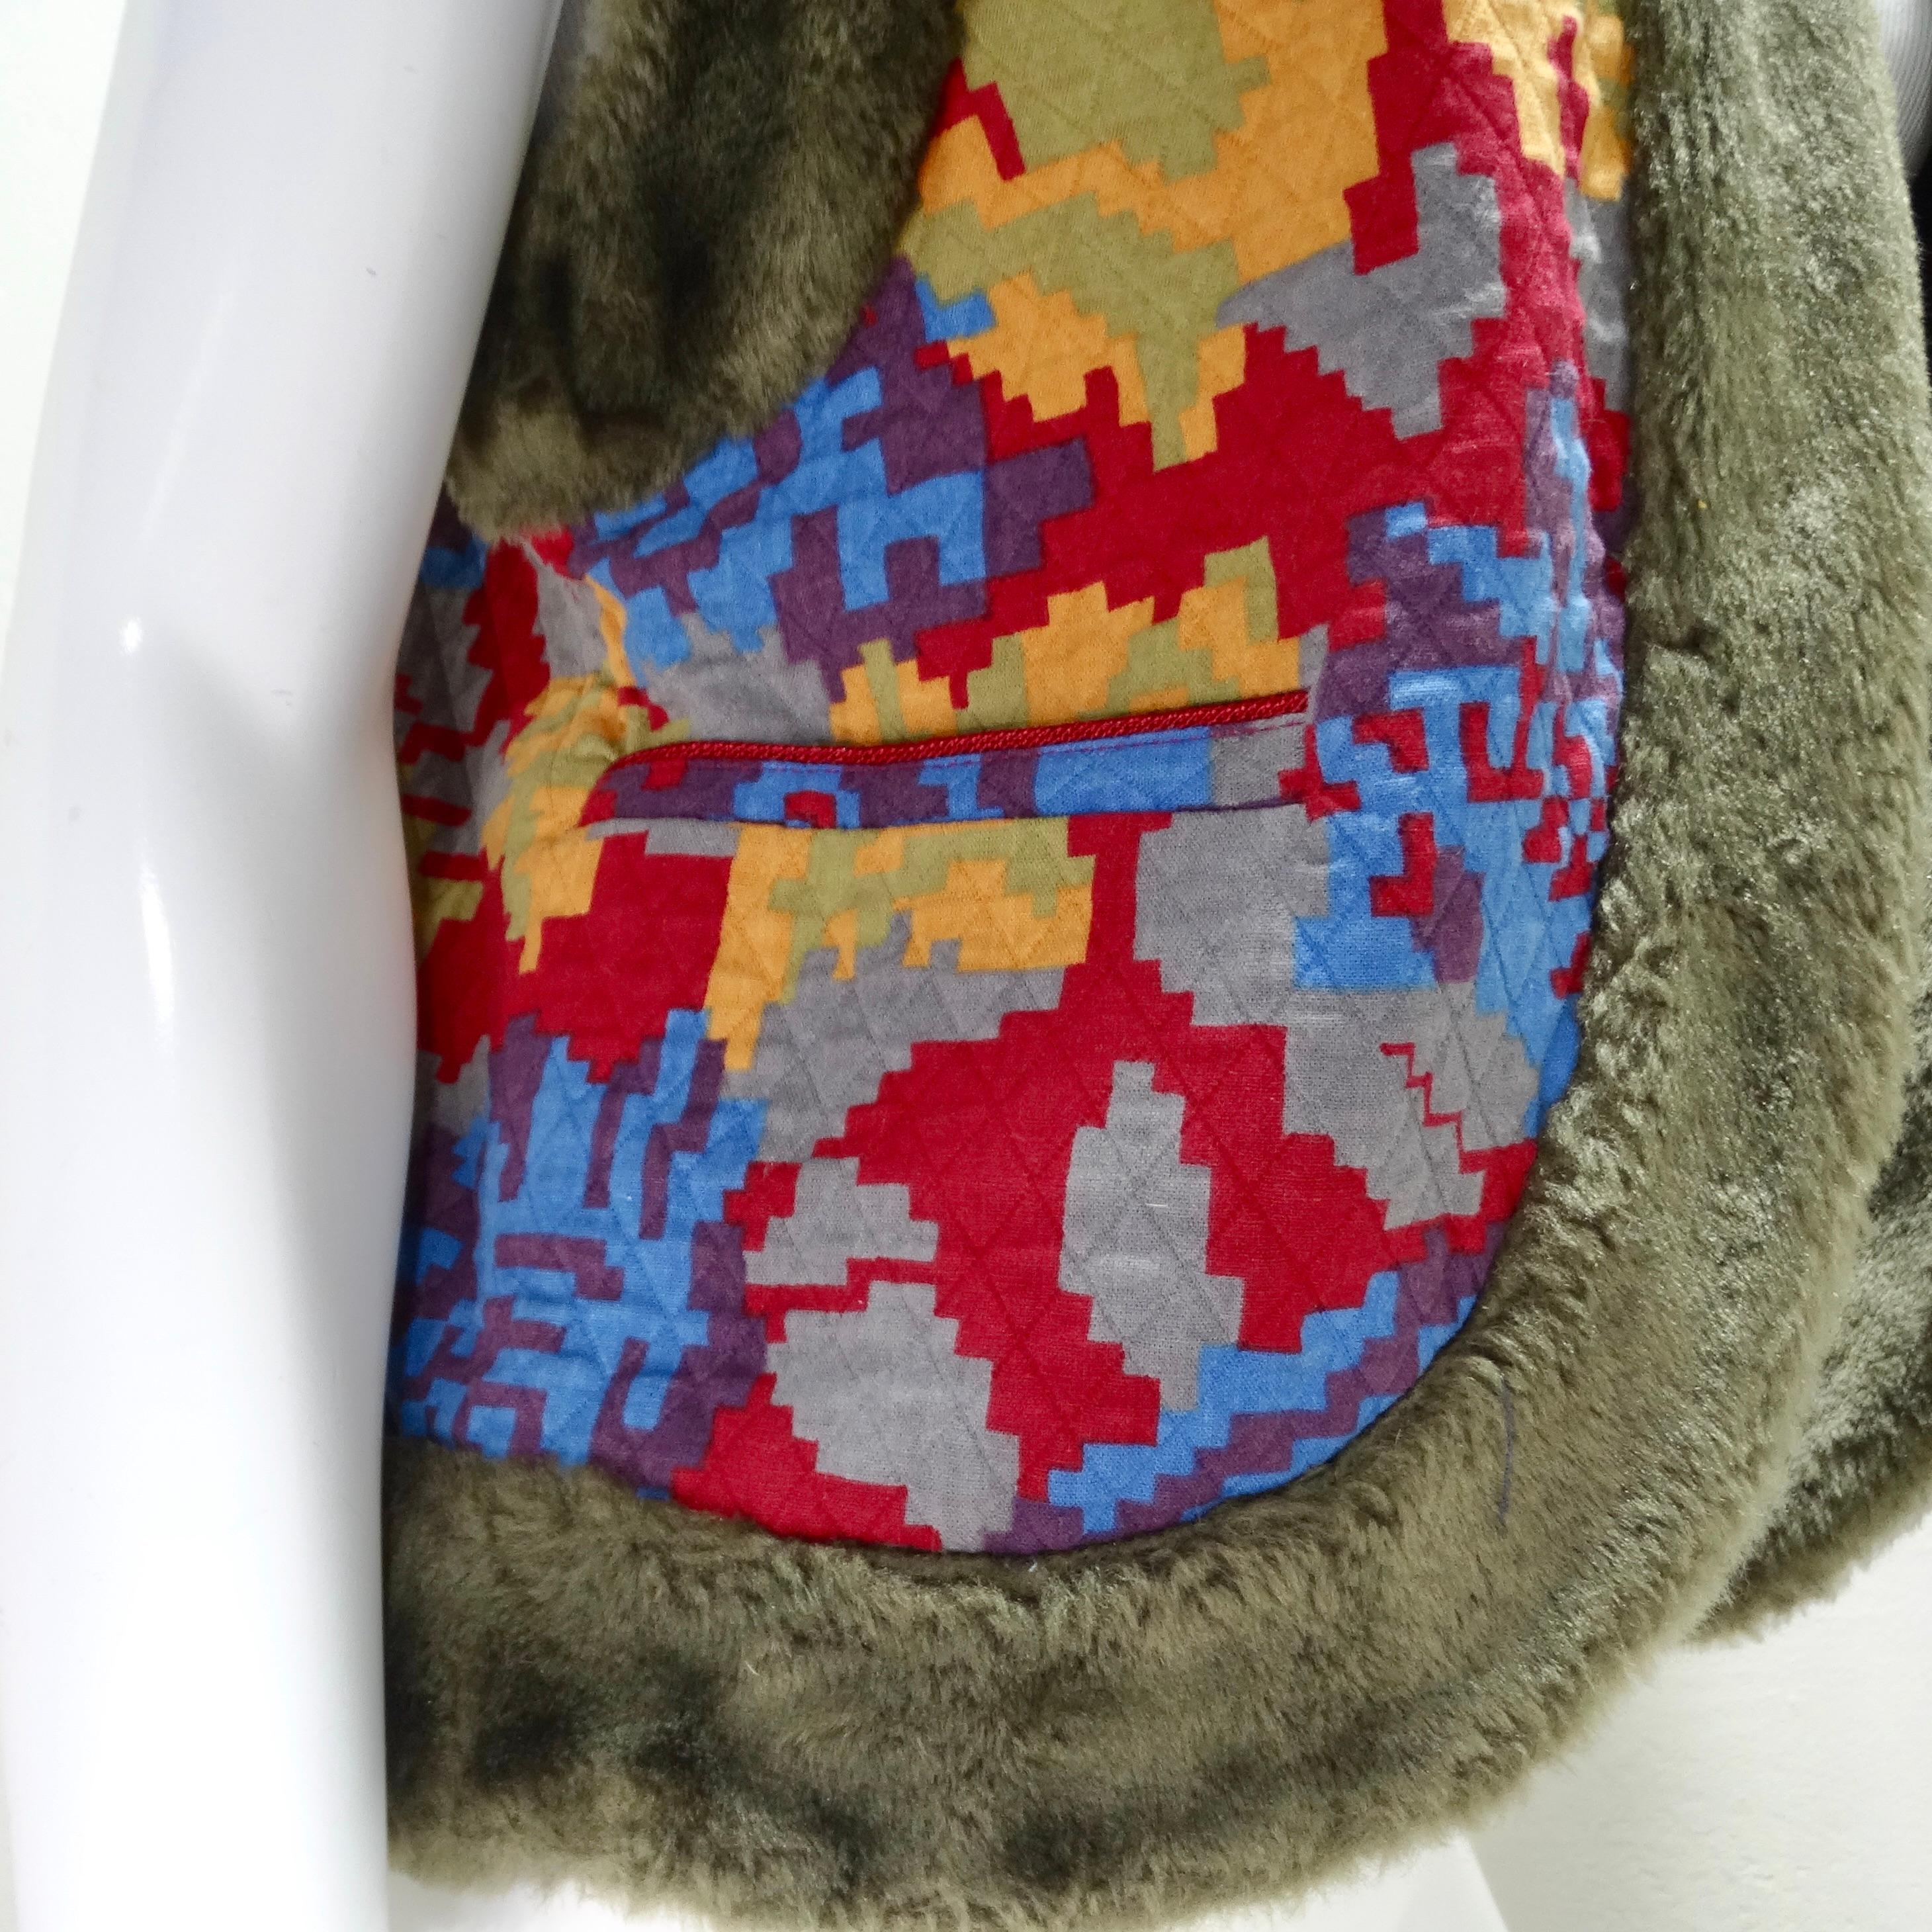 Introducing the Bis Bis Vintage Faux Fur Lined Quilted Rosette Vest, a bold and playful statement piece that exudes vintage charm. Crafted in the 1980s, this eye-catching vest features a quilted cotton multicolor rosette print that adds a whimsical